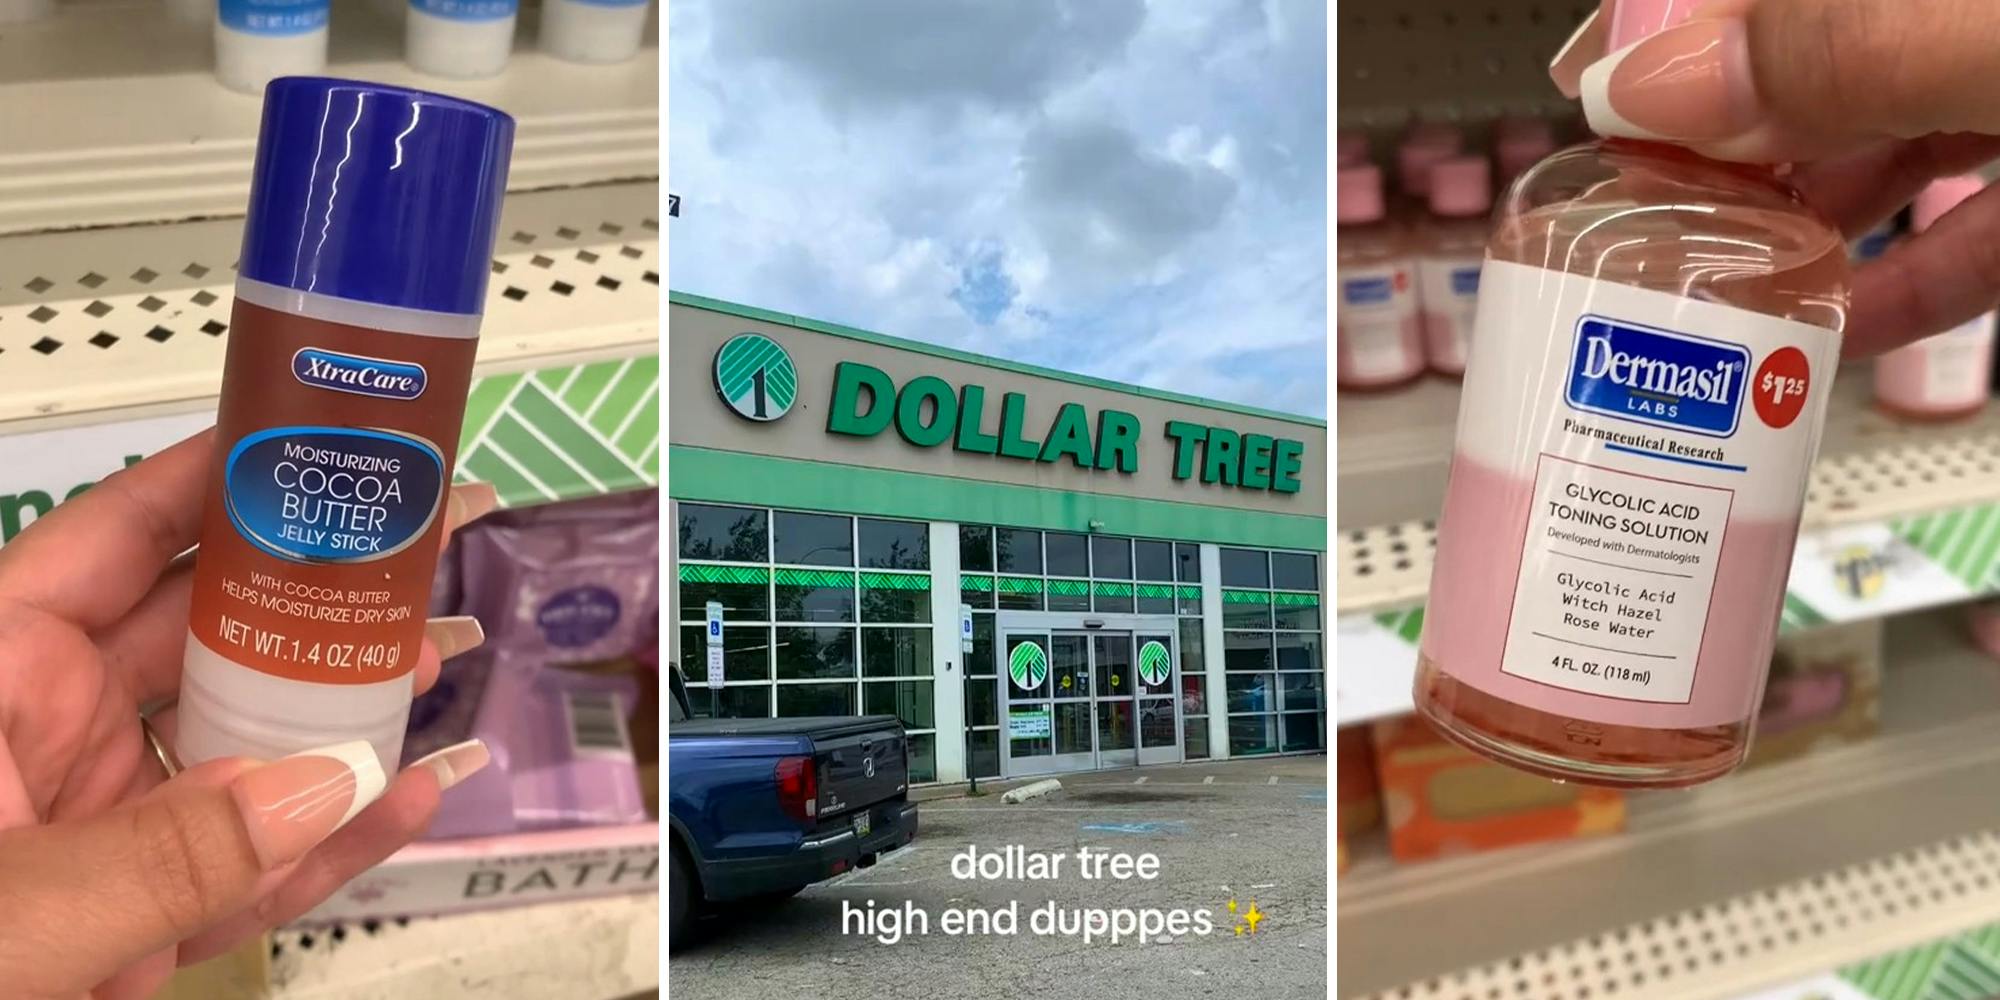 ‘I think my dollar tree is broken’: Dollar Tree shopper finds dupes for The Ordinary, Sun Bum, OLAY in beauty section